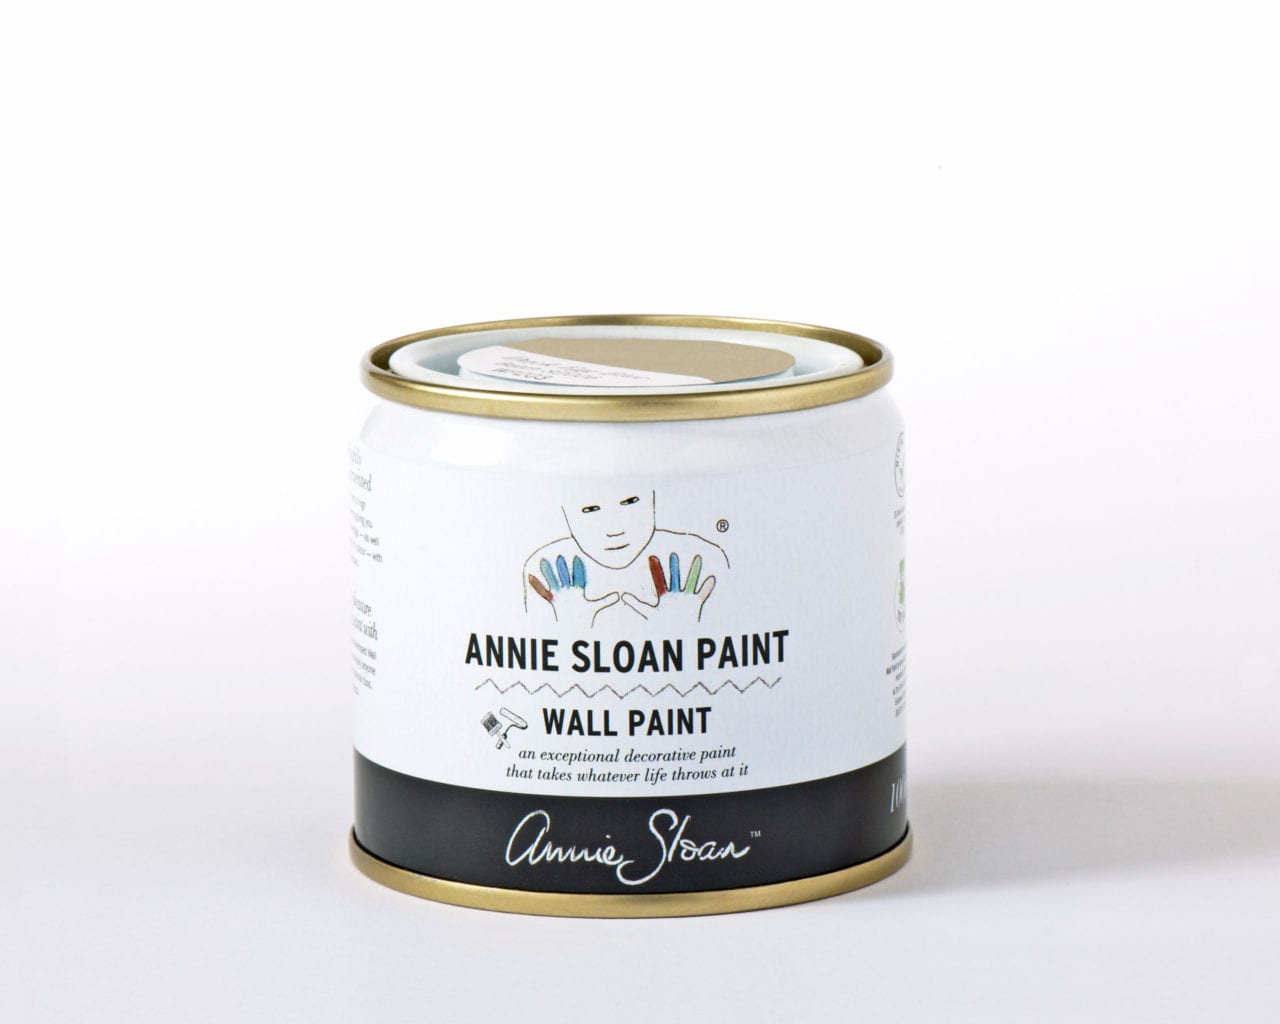 100ml tester tin of Wall Paint by Annie Sloan in Country Grey, a rustic putty cream biege